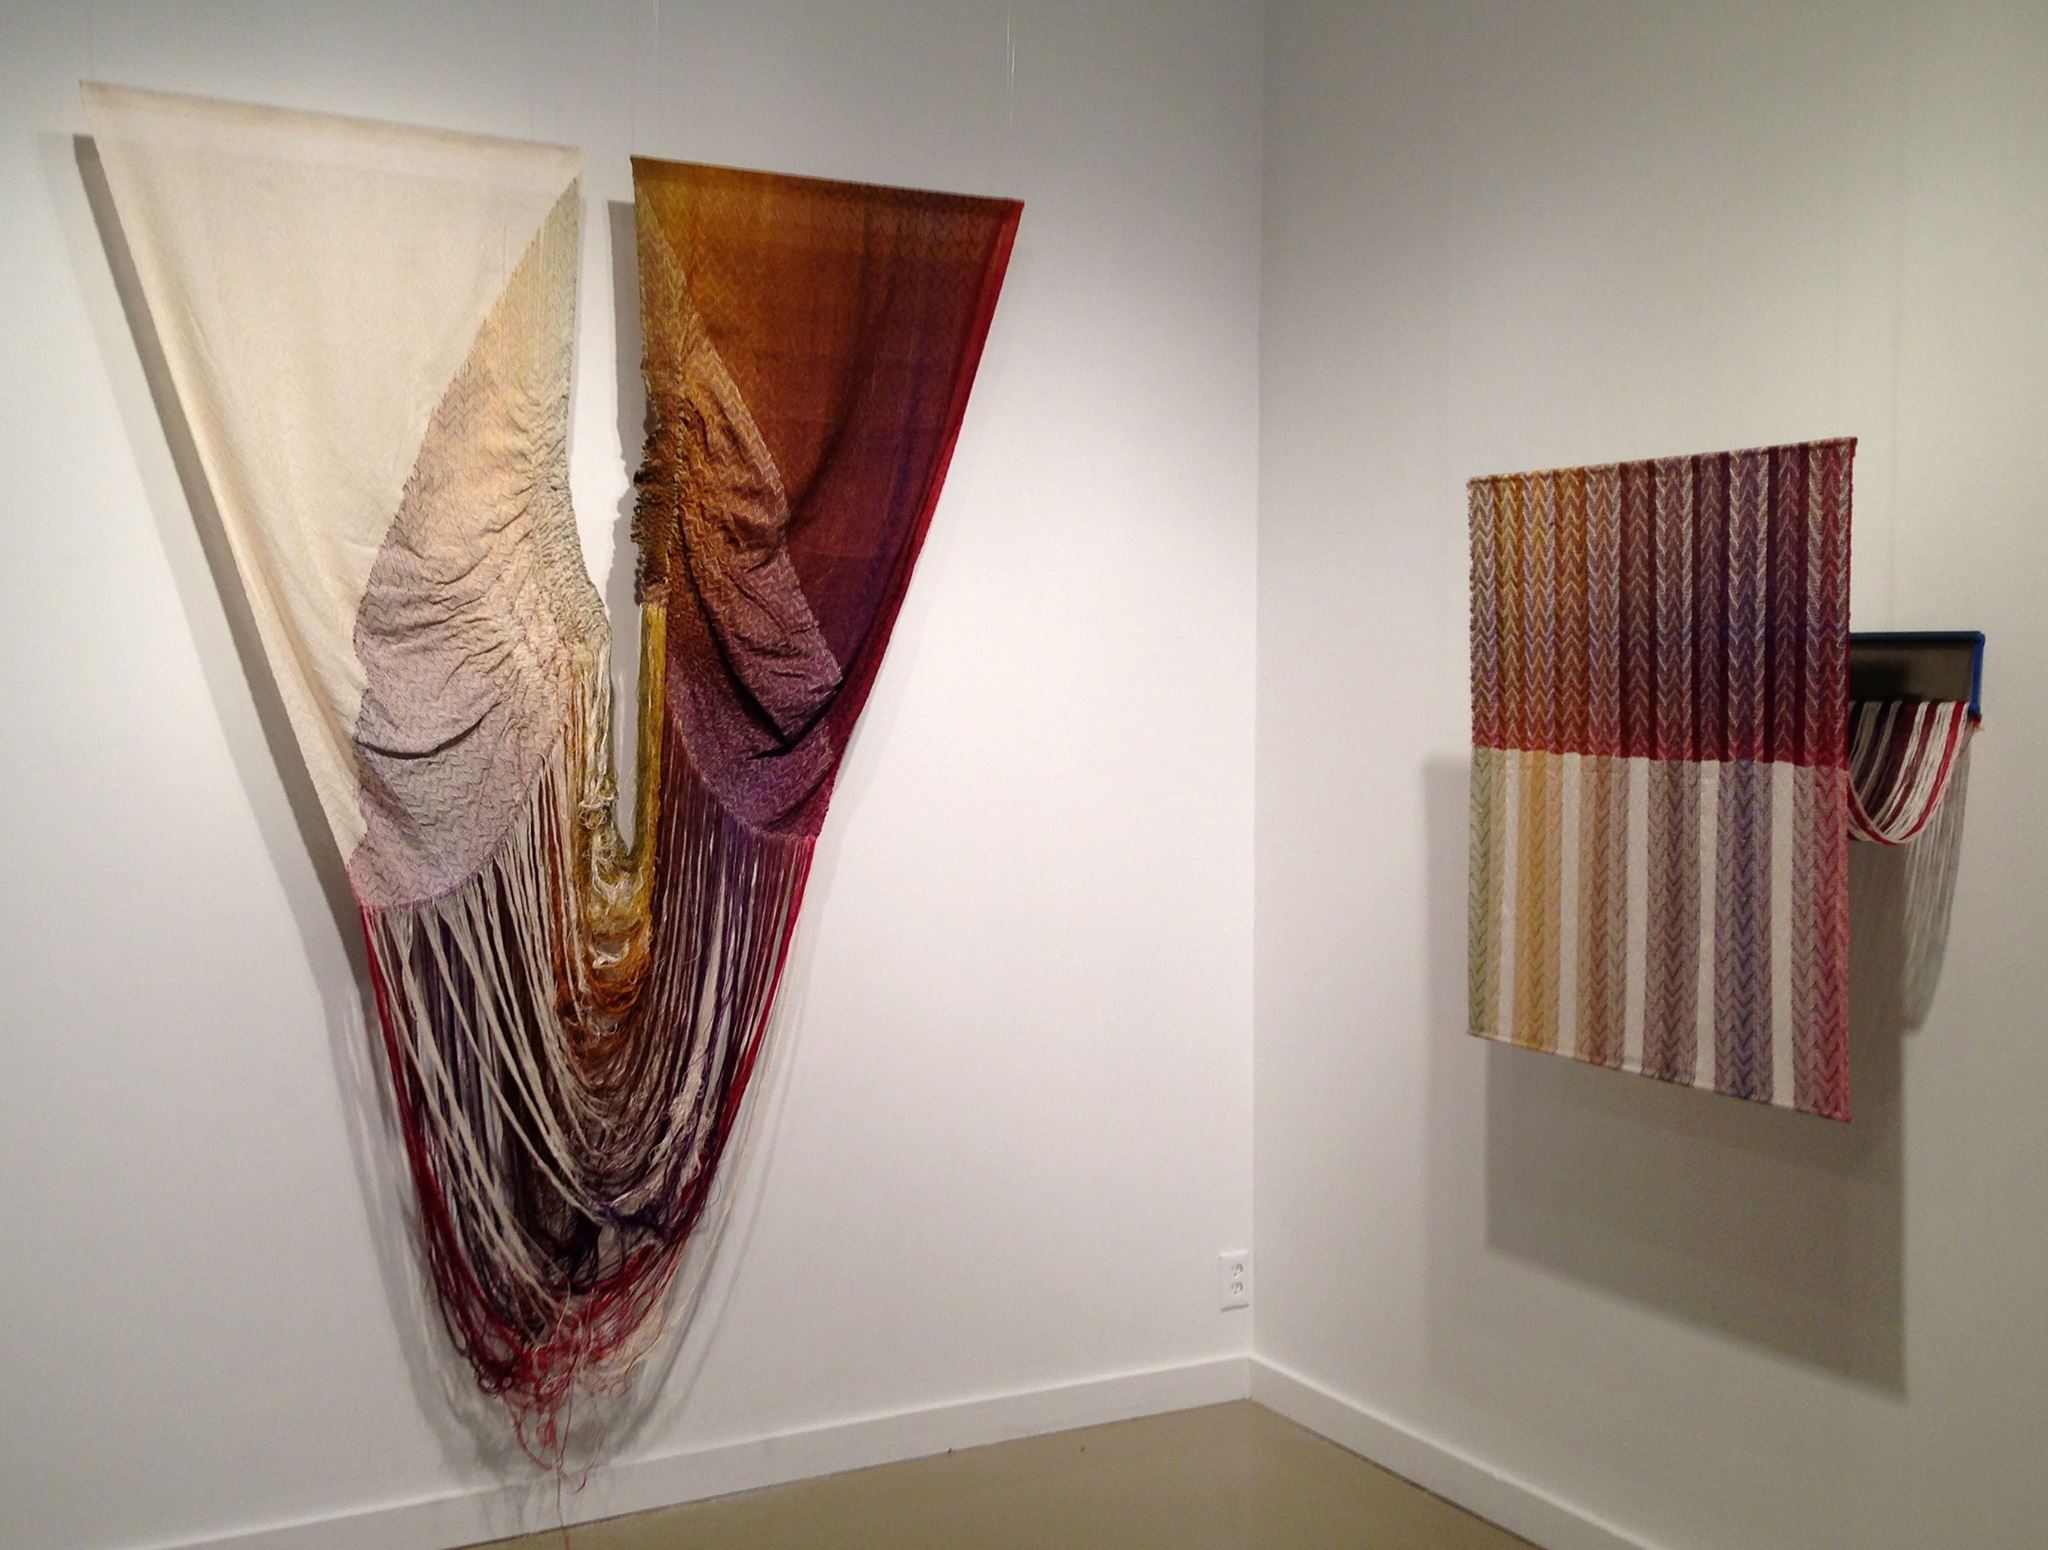  Title:  1364 Threads Pulled One at a Time Woven Textiles   Size: 74” wide x 88 ” long  Medium: Hand-dyed, hand-woven  Materials: tencel  For process information and pricing, please contact us by clicking on this  link .  